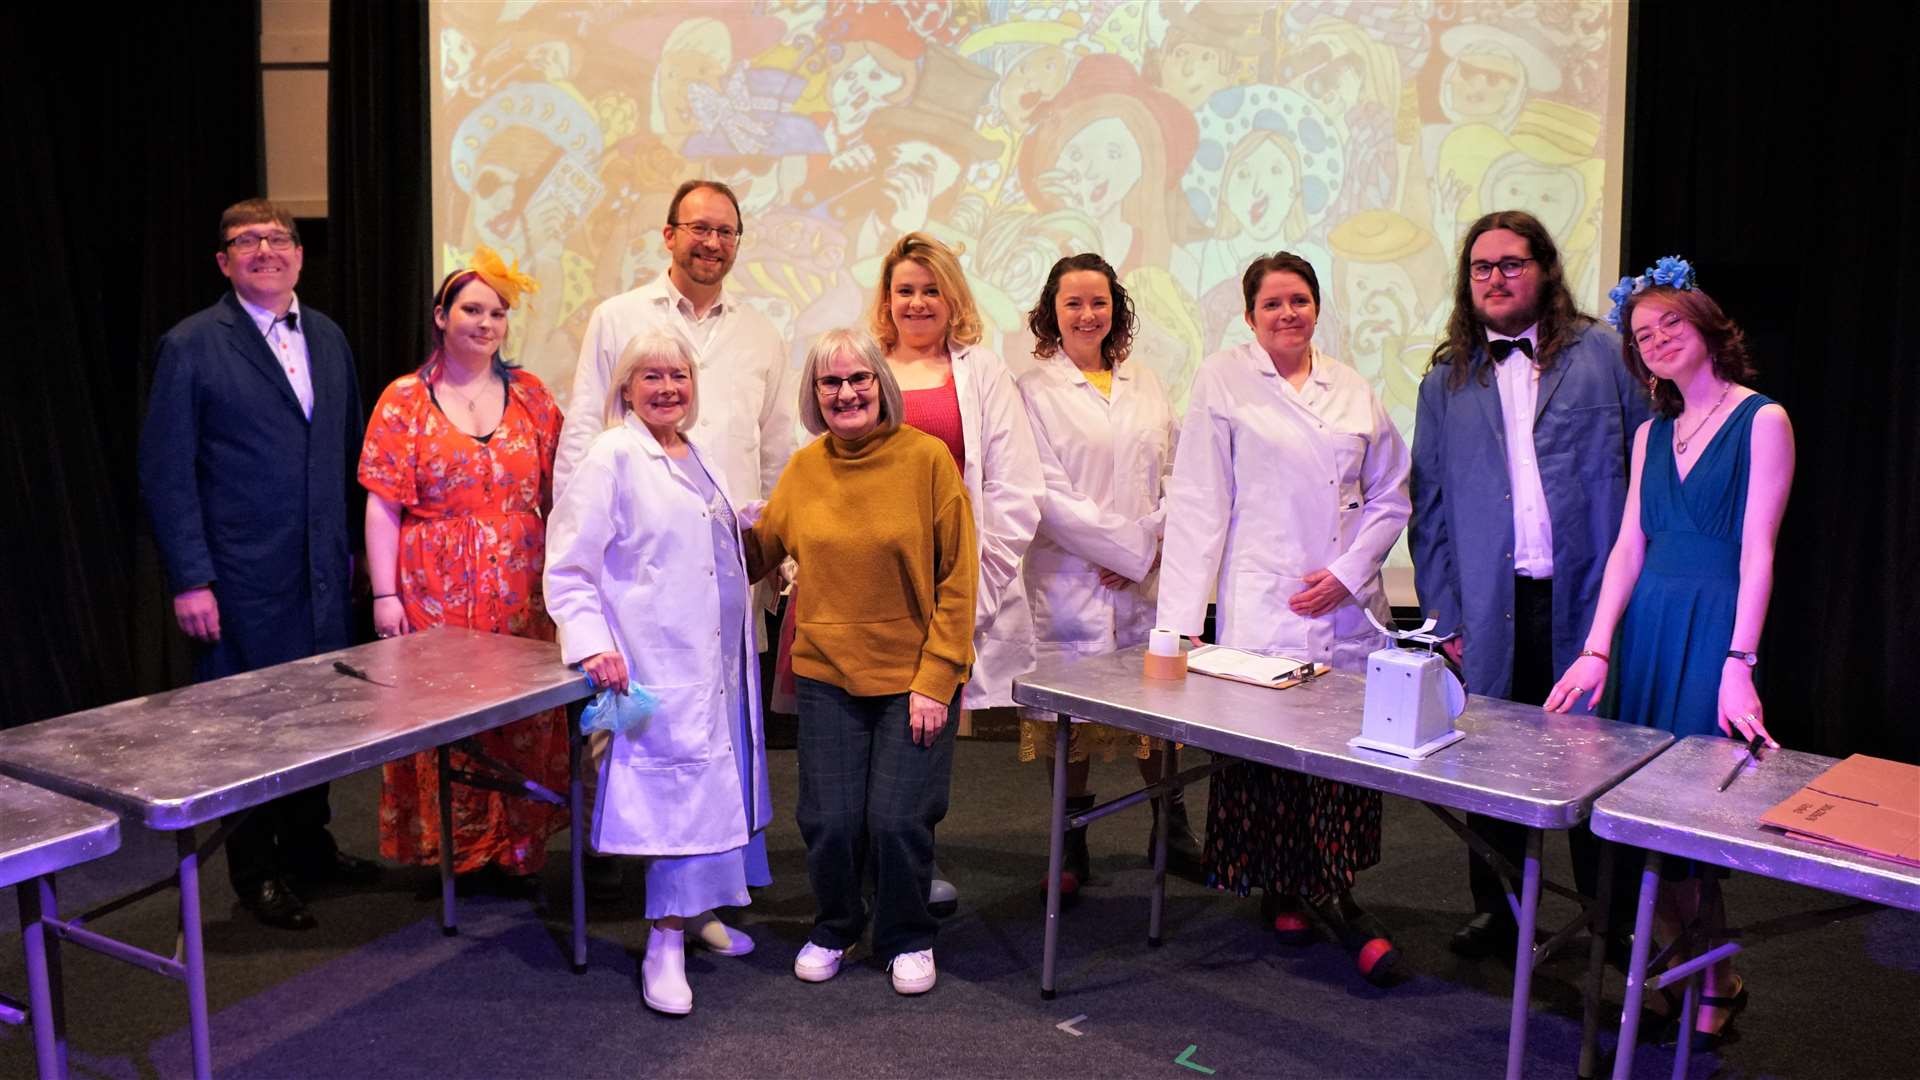 The full cast at the end of Monday night's dress rehearsal by Thurso Players of Ladies' Day with director Audrey O'Brien in mustard jersey at front. Picture: DGS